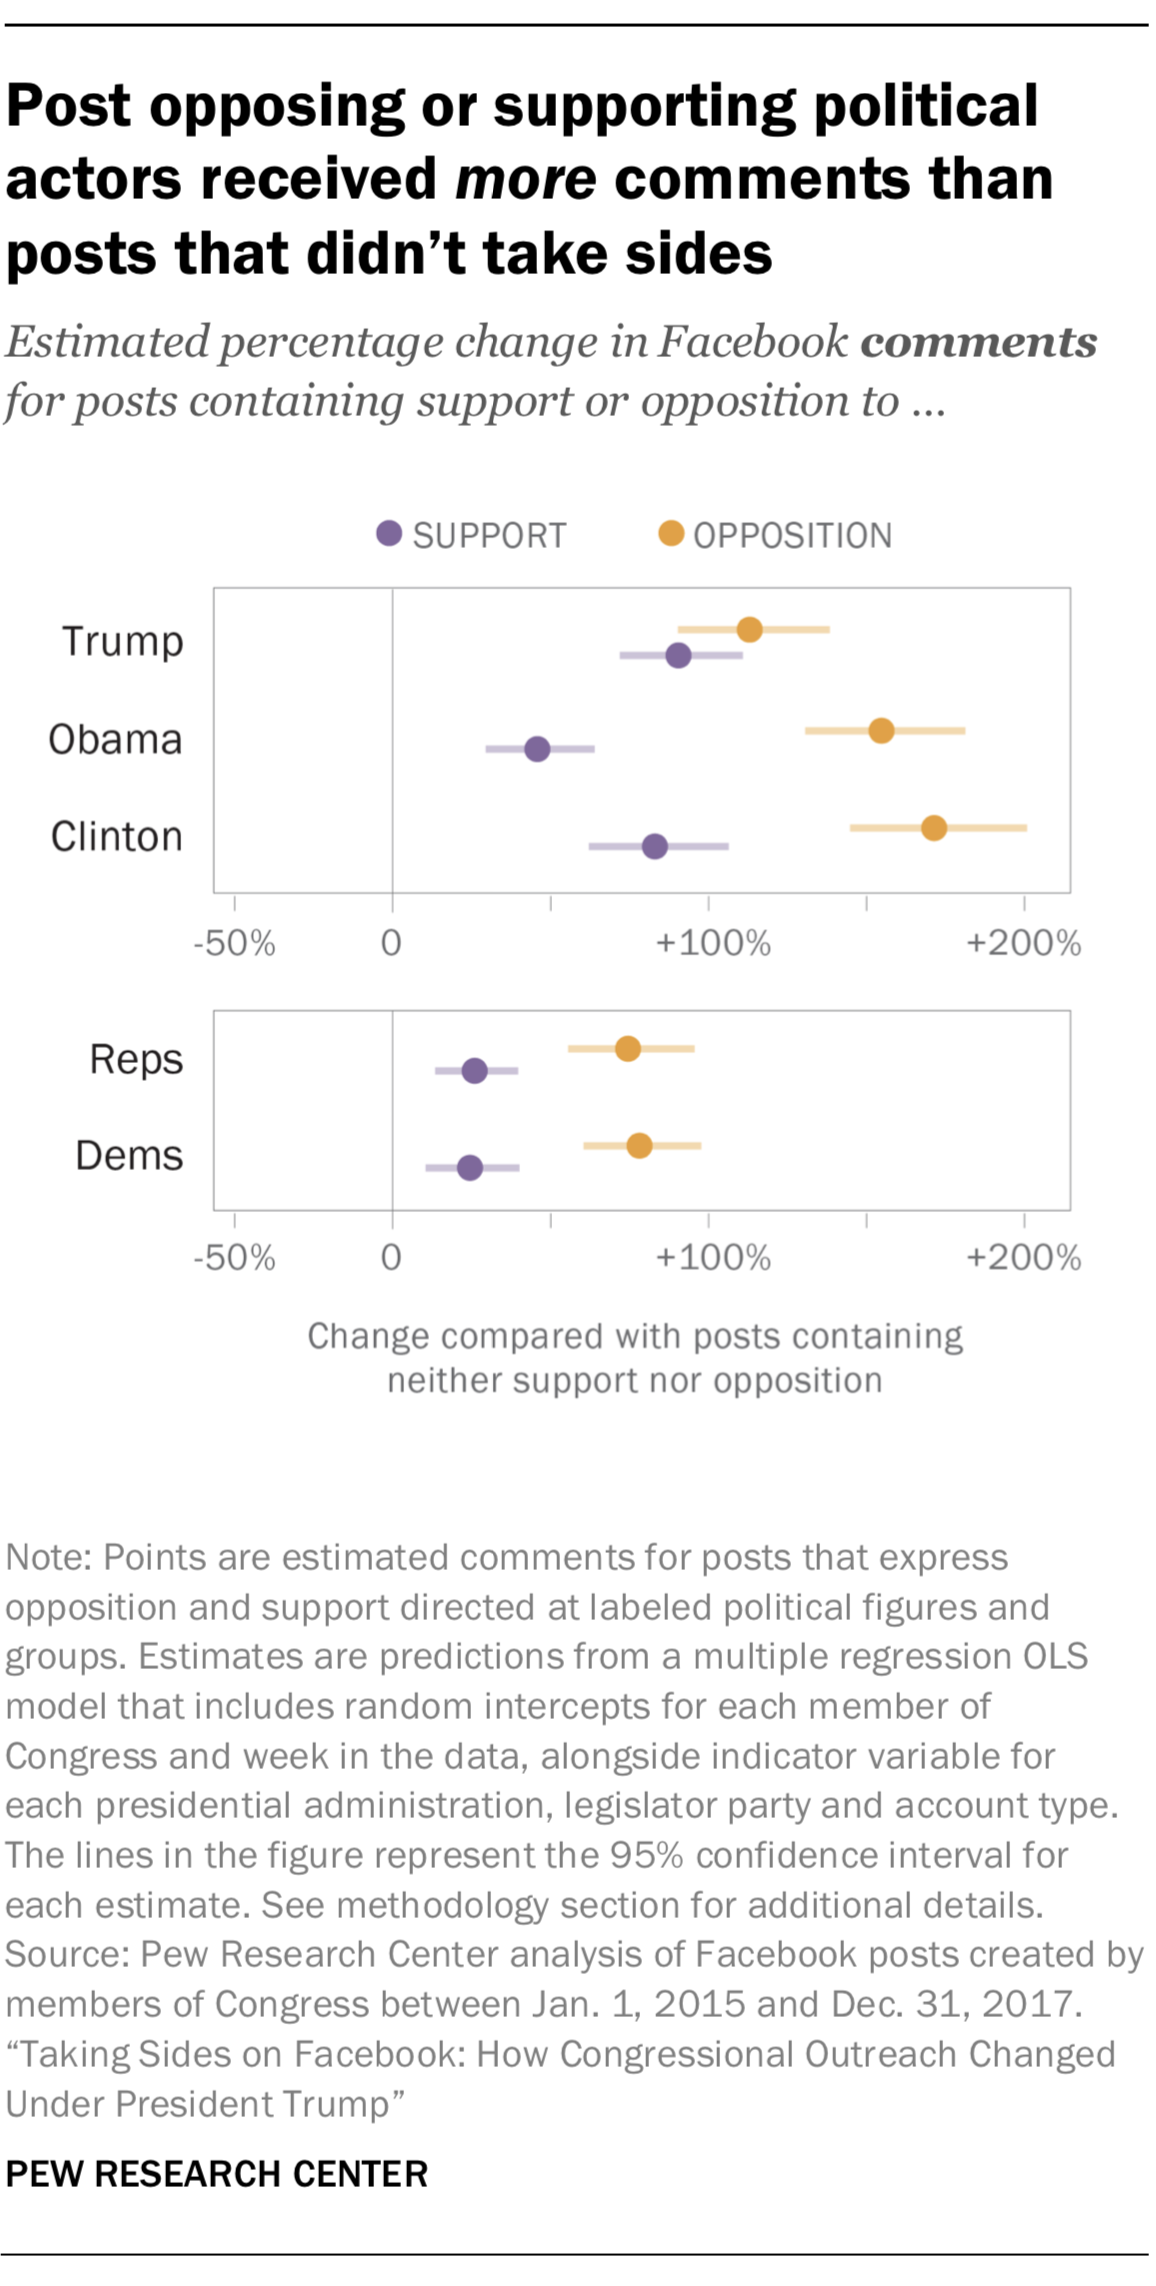 Post opposing or supporting political actors received more comments than posts that didn’t take sides